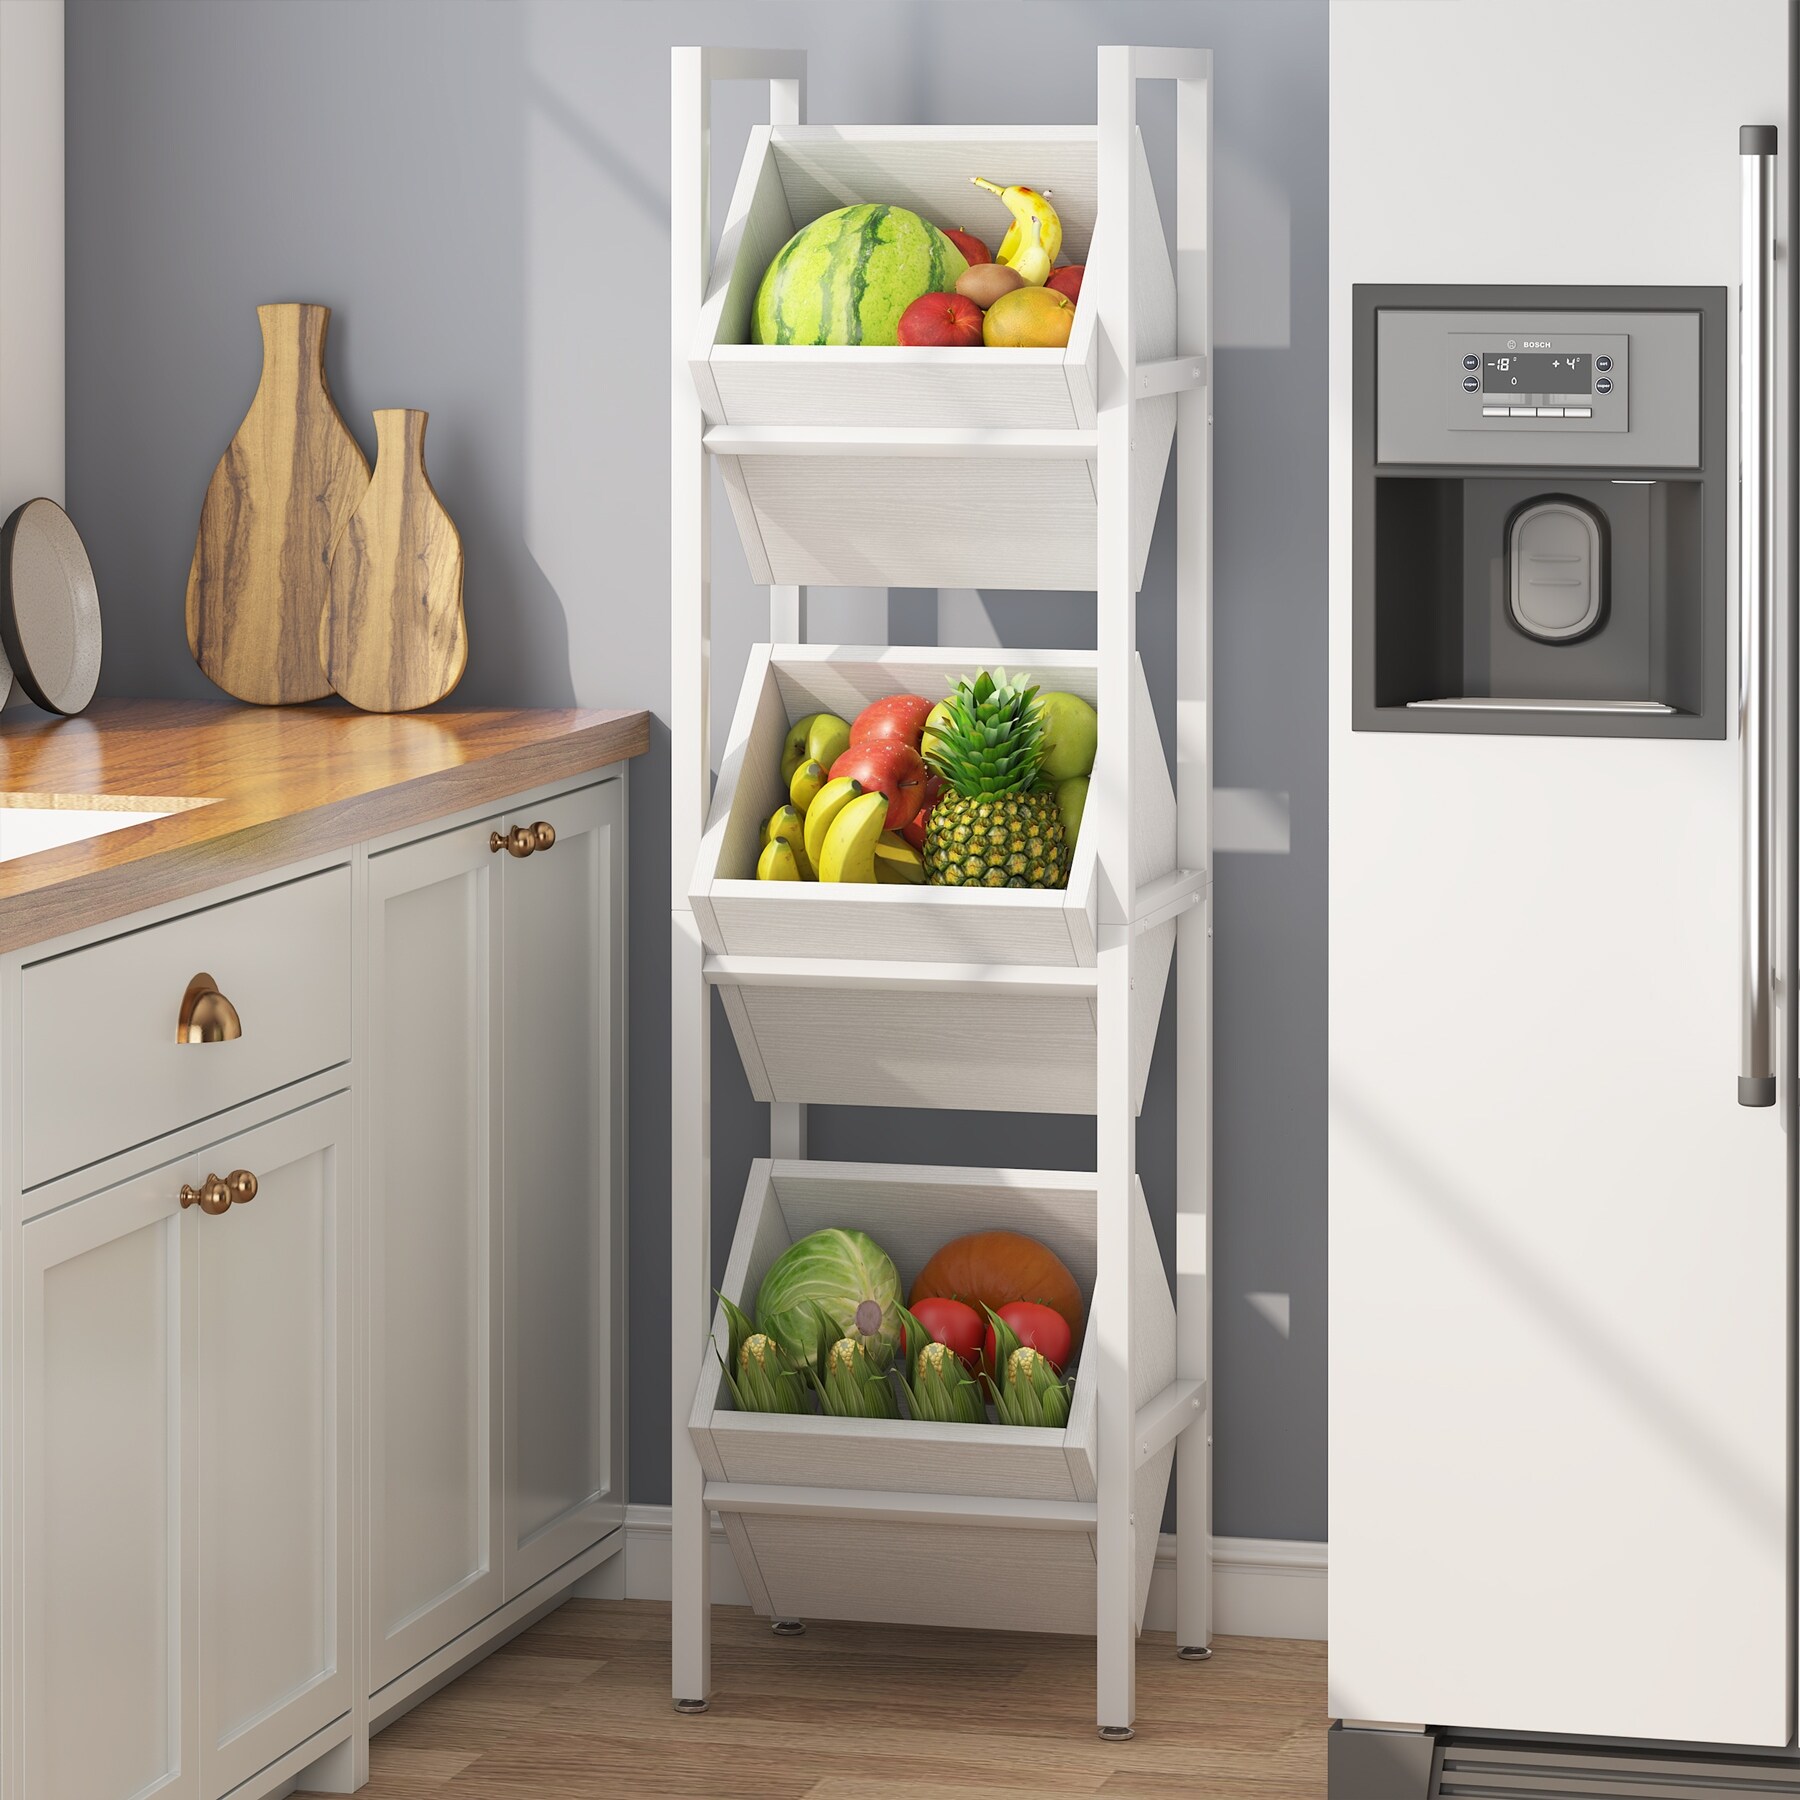 https://ak1.ostkcdn.com/images/products/is/images/direct/5346cd3d5e142867b93f8bd259220b9f0b3631ae/Vertical-Standing-Basket-Storage-Tower-for-Kitchen-Bathroom-Living-Room.jpg